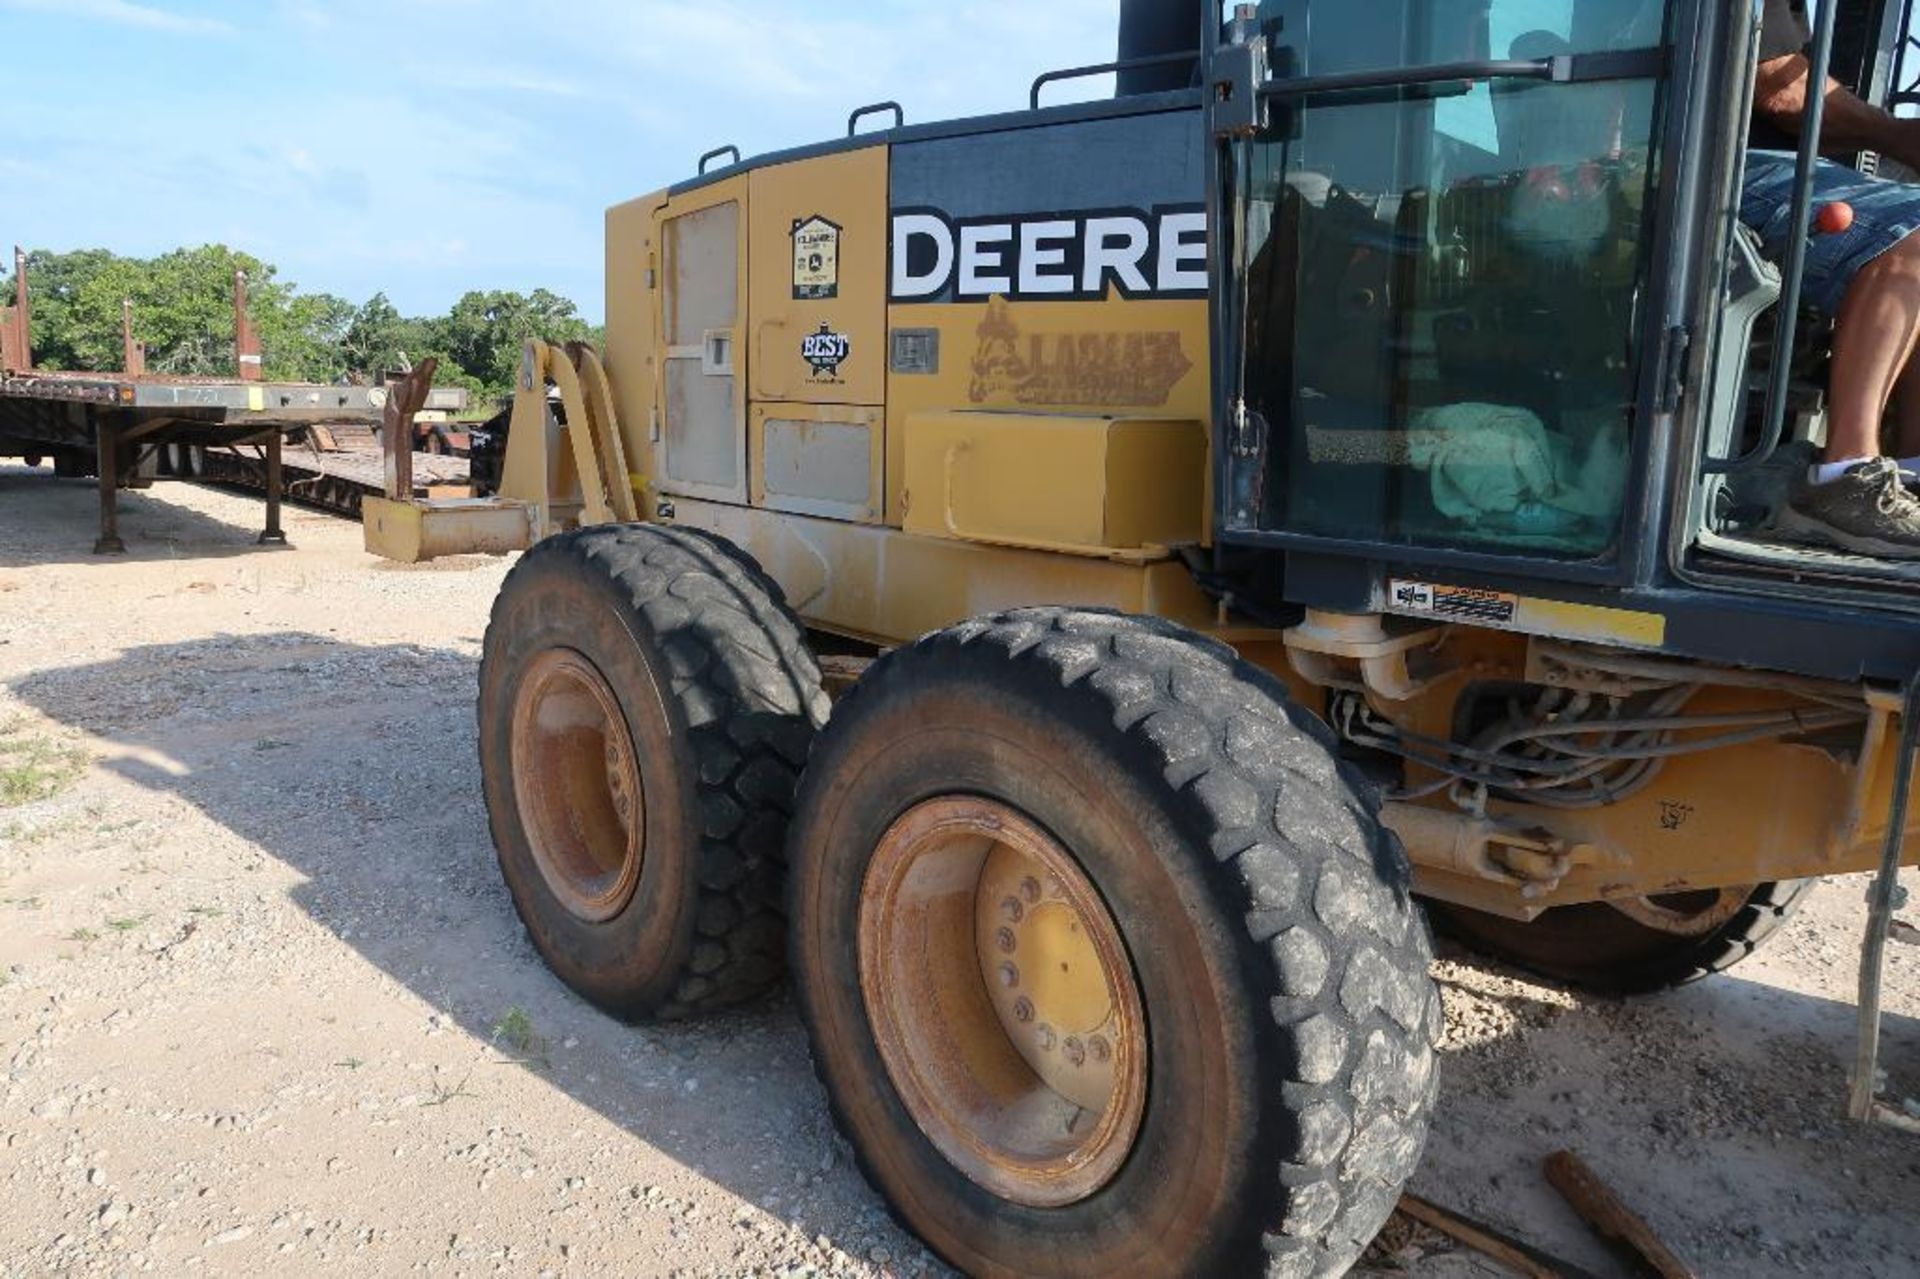 2007 John Deere Motor Grader Model 870D, S/N DW870DX611431, with Ripper (10,340 hours indicated) - Image 4 of 8